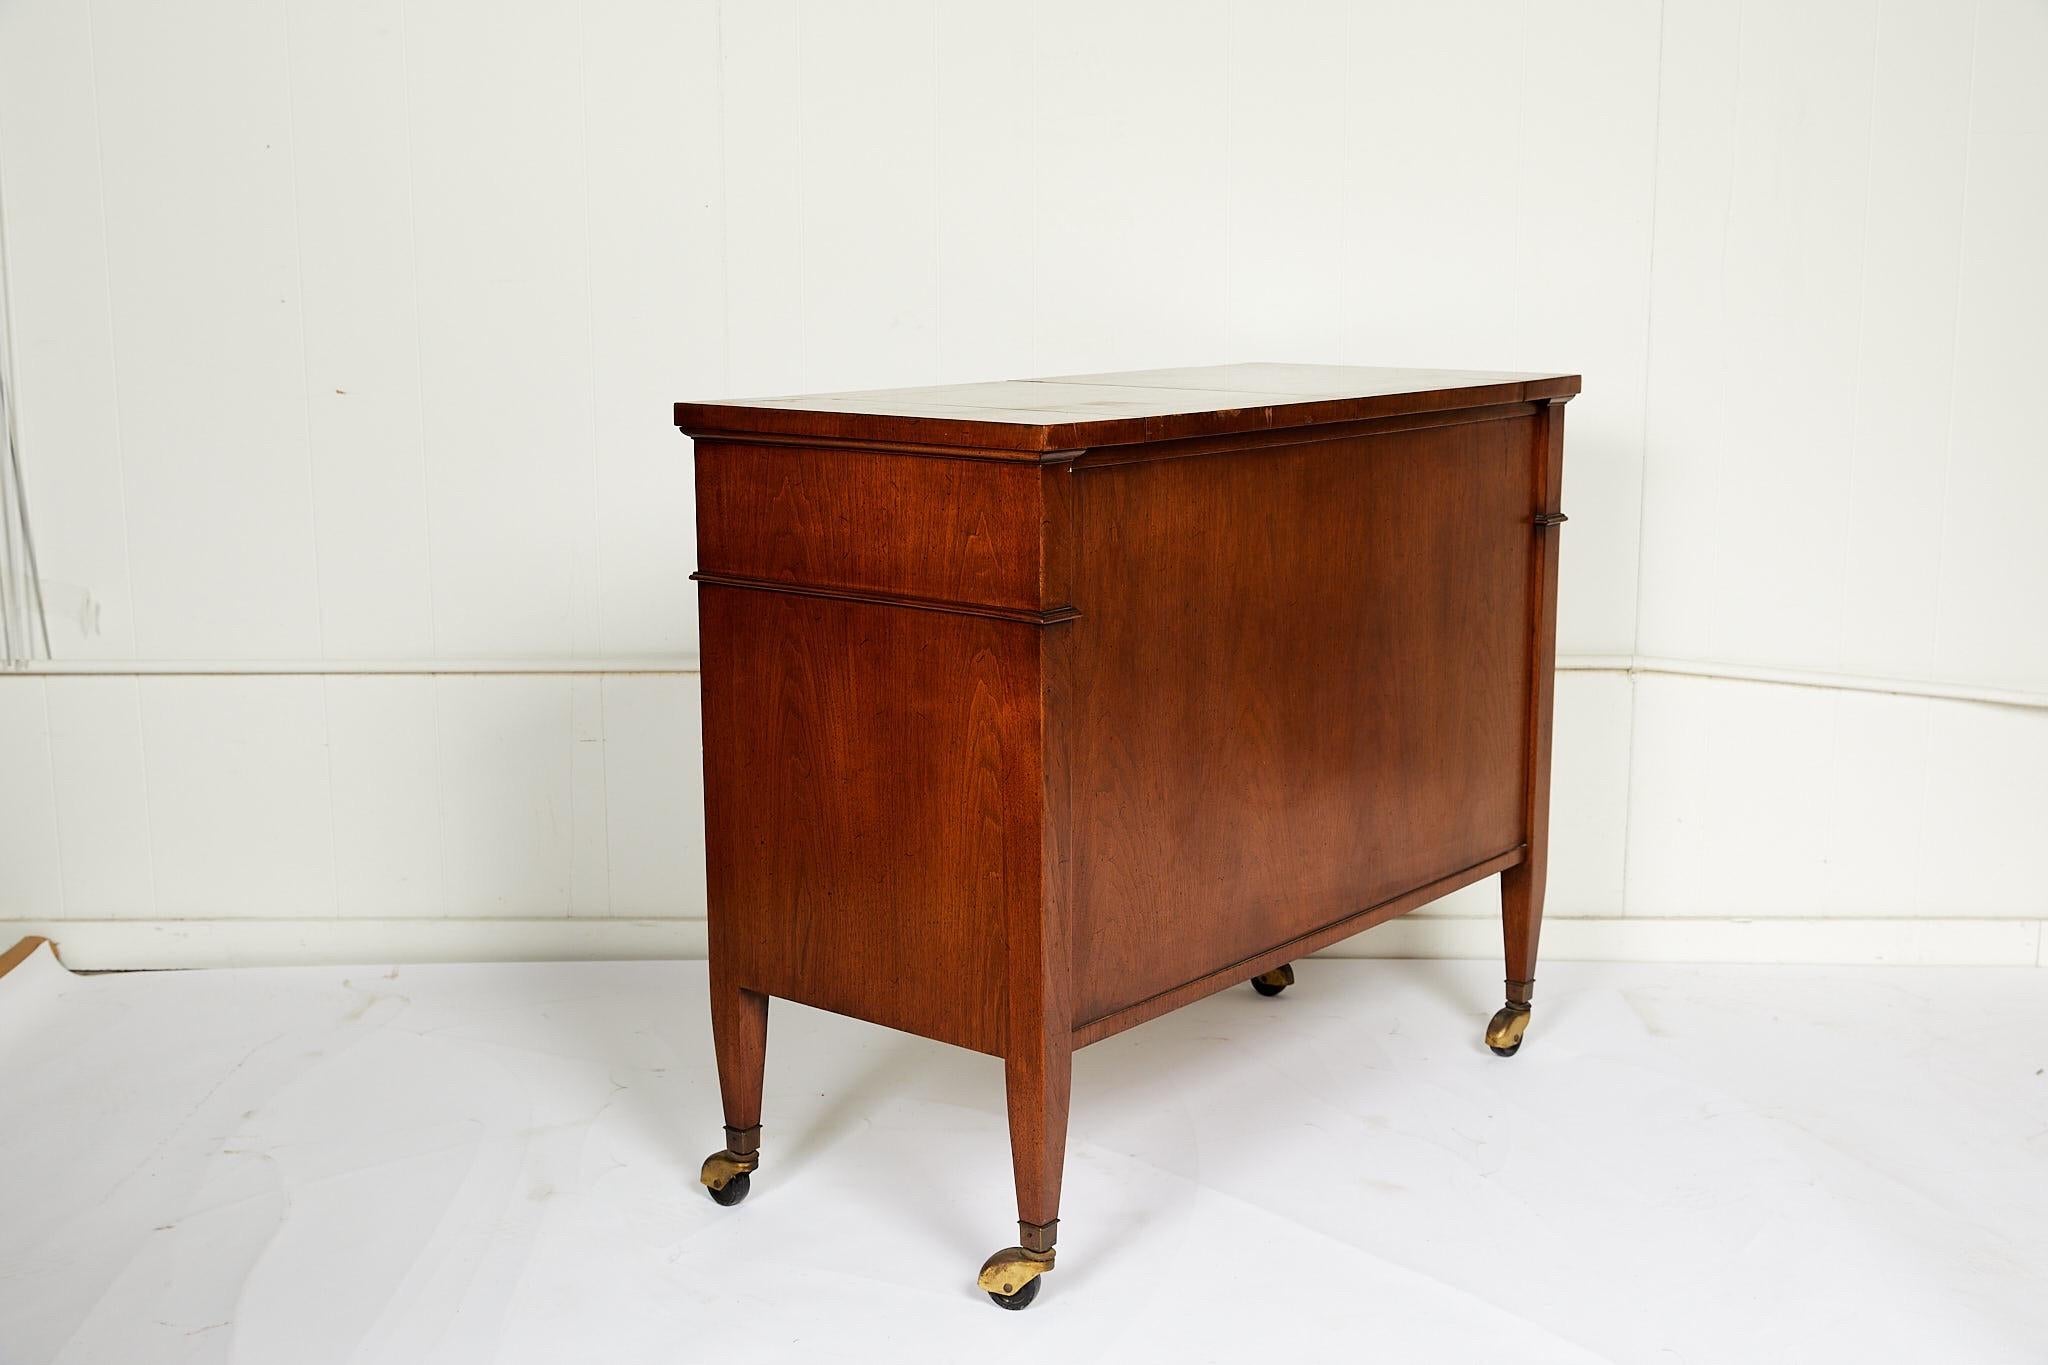 This 20th century vintage sideboard features a walnut finish on all sides, convertible black formica top, and casters for versatility and easy service. The case holds one wide drawer with brass ring pulls above two Regency style paneled doors with